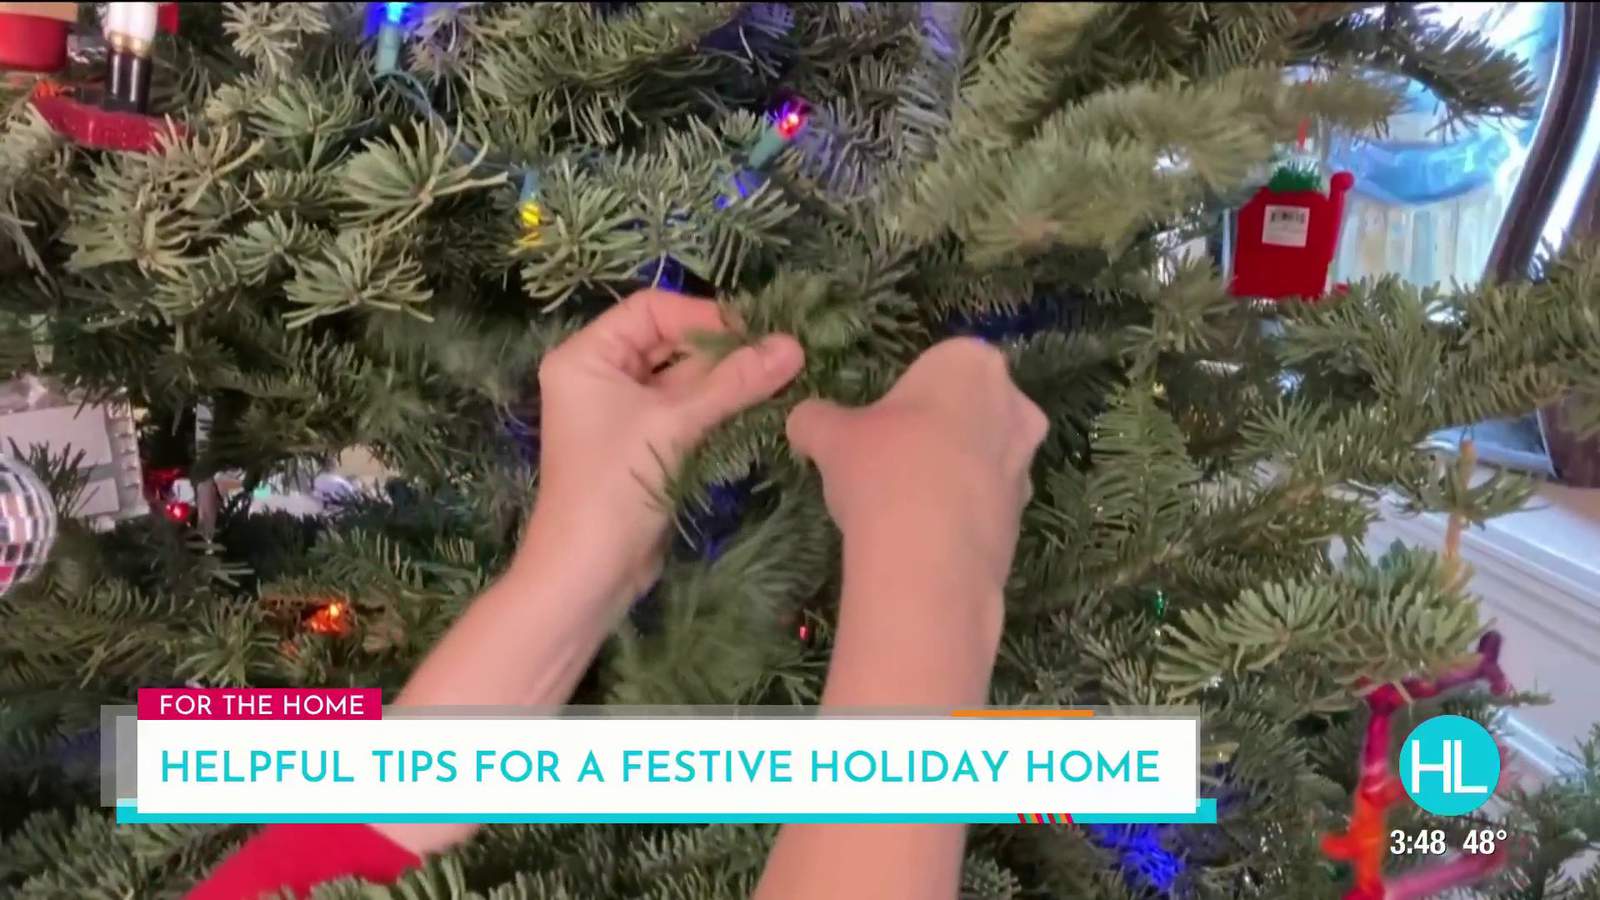 Practical ideas for a festive vacation household